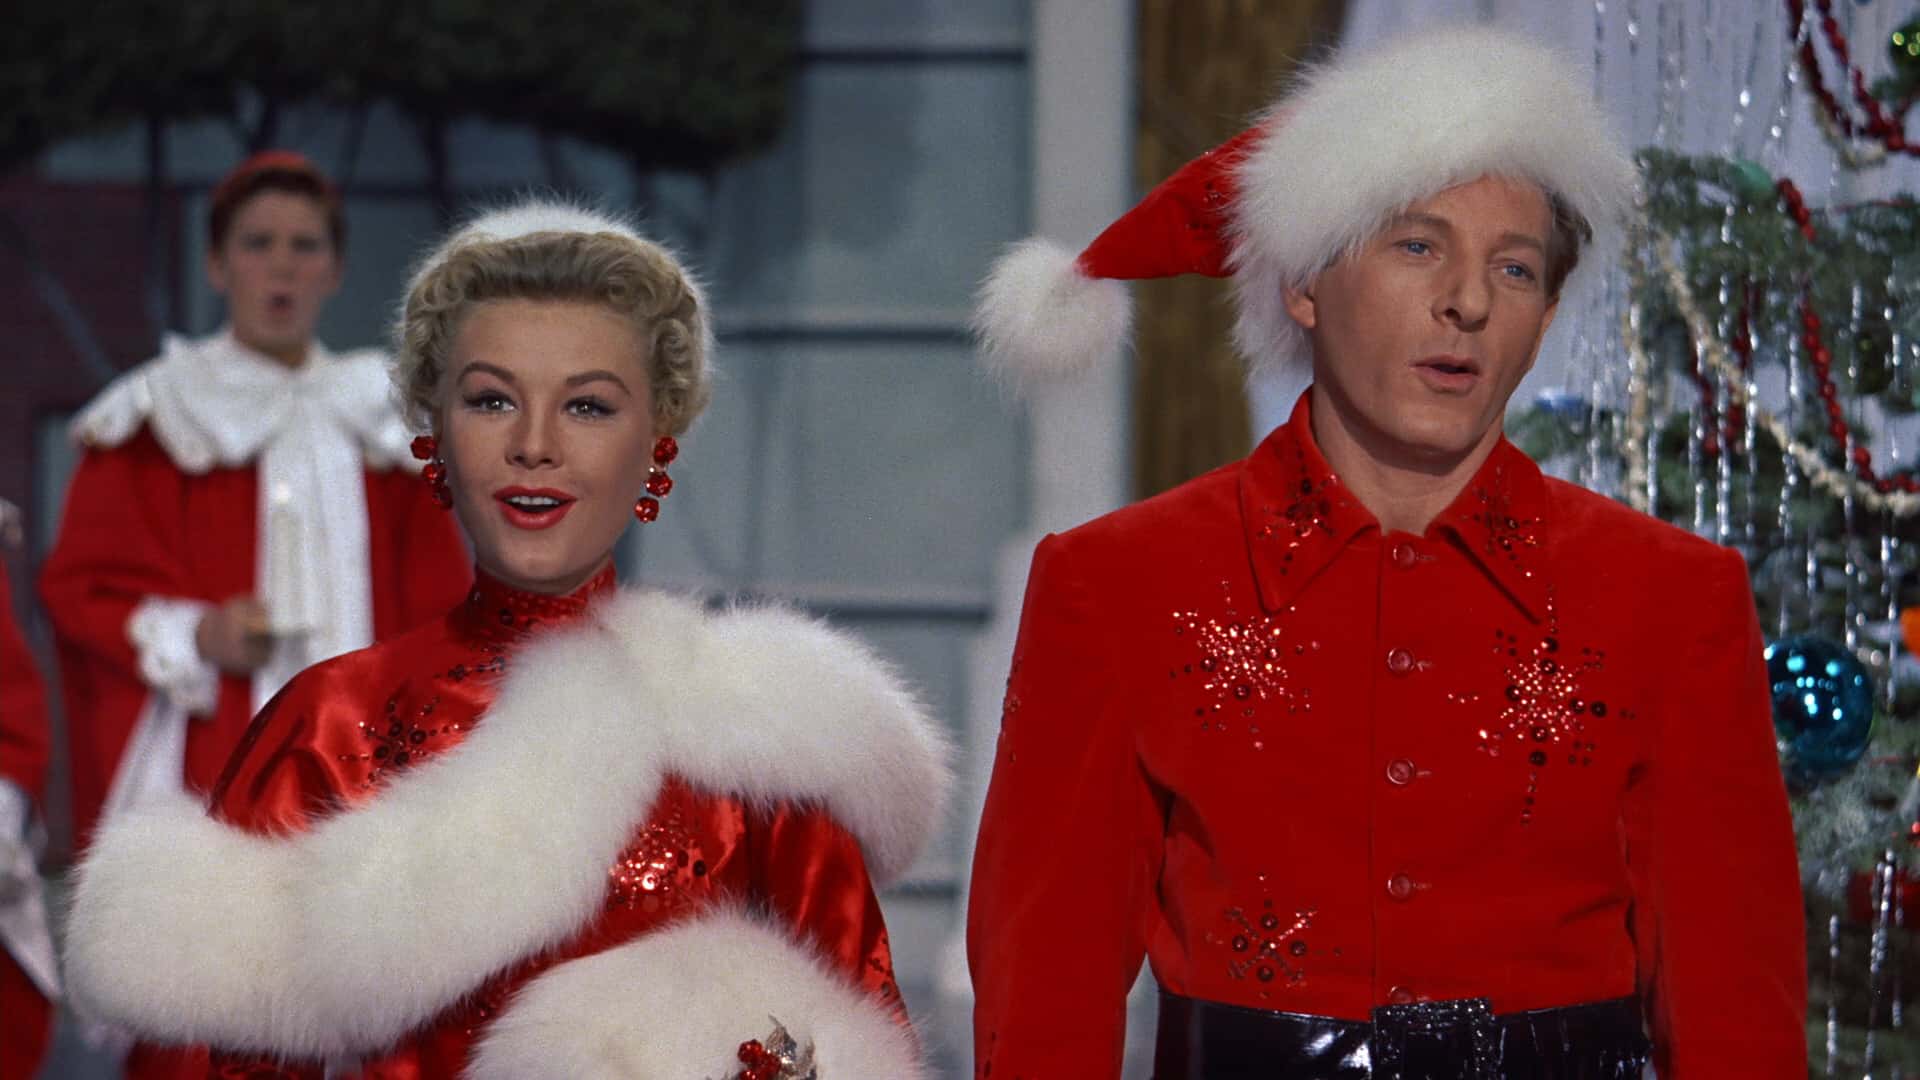 A woman and a man singing in Christmas outfits in this image from Paramount Pictures.